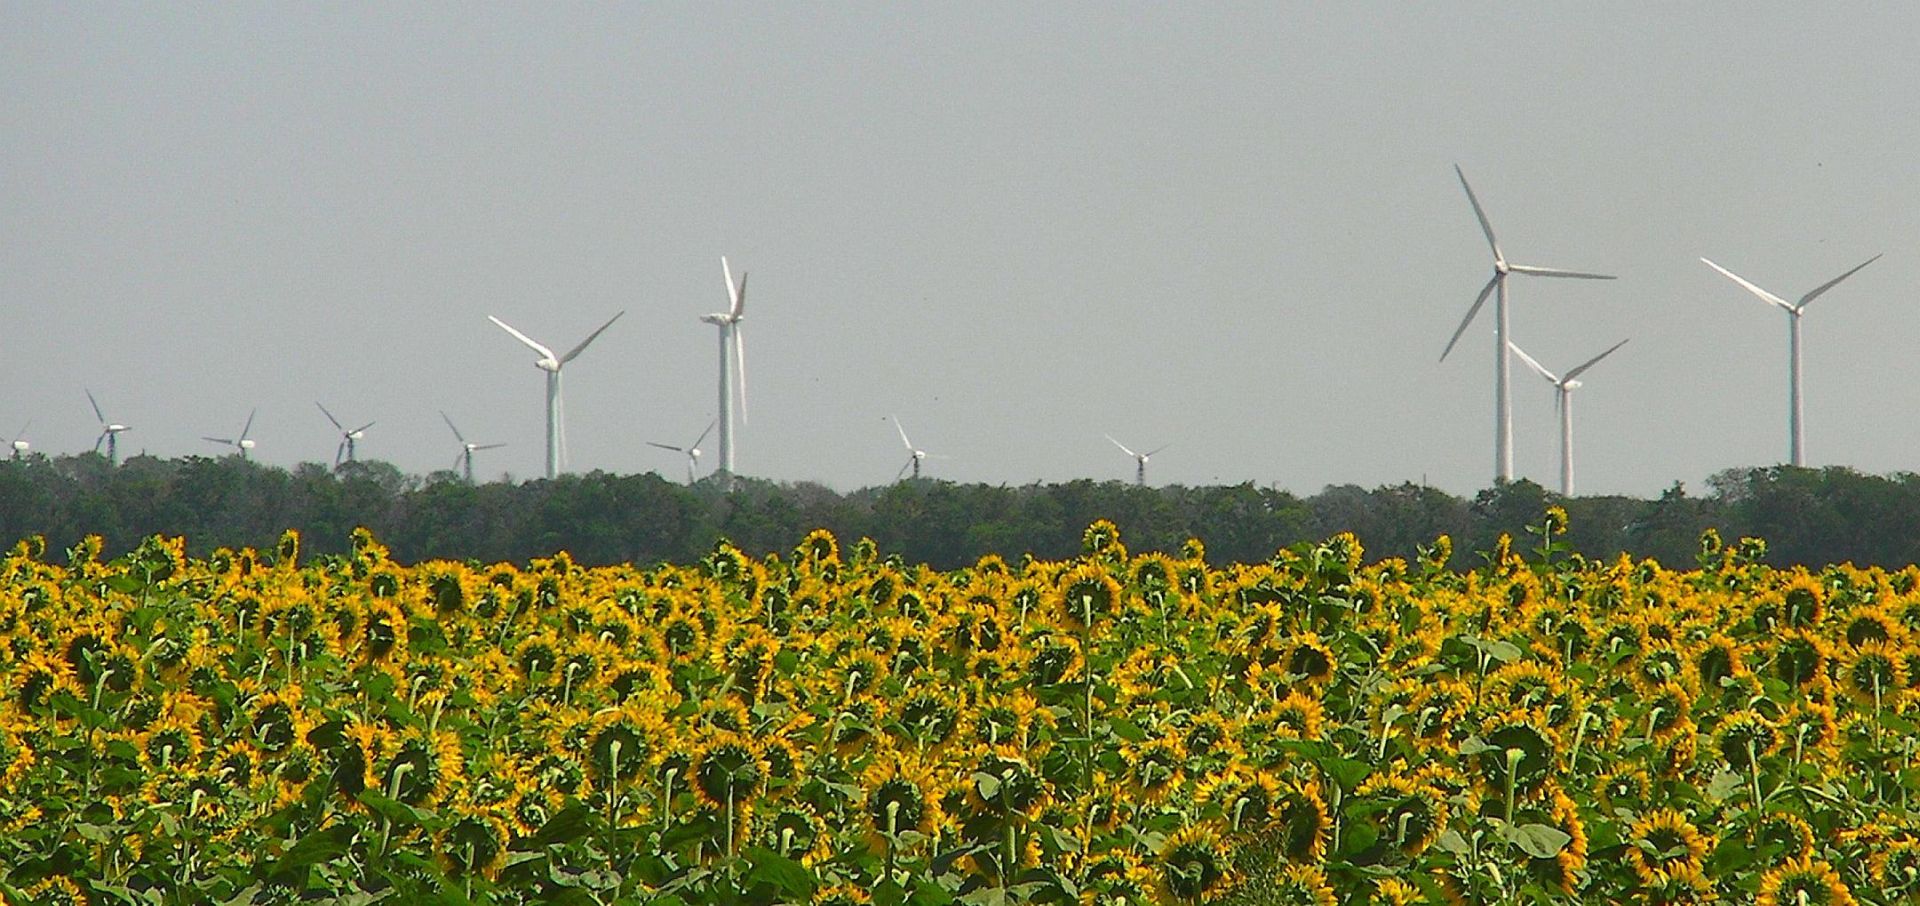 windmills behind a field of sunflowers